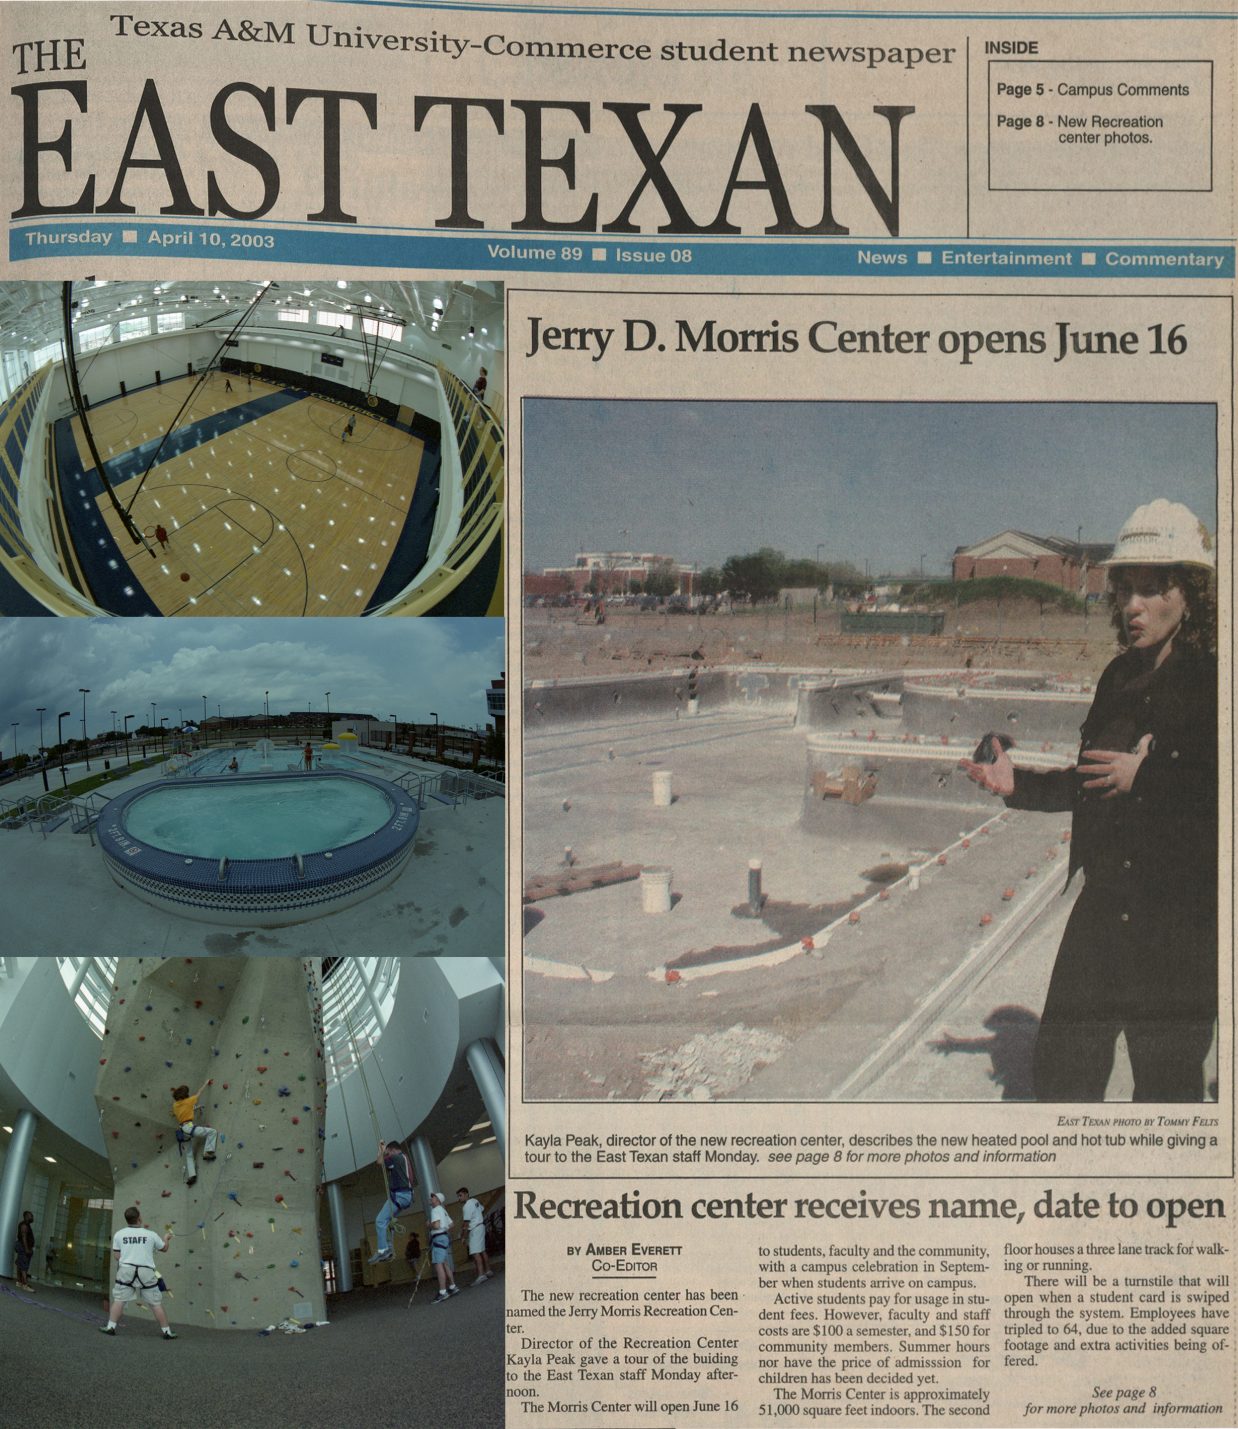 Three vertically stacked images at left show the gym, swimming pool and climbing wall in 2003. A newspaper clipping at right announces the center's opening date and features a photo of a woman describing the new heated pool and hot tub.